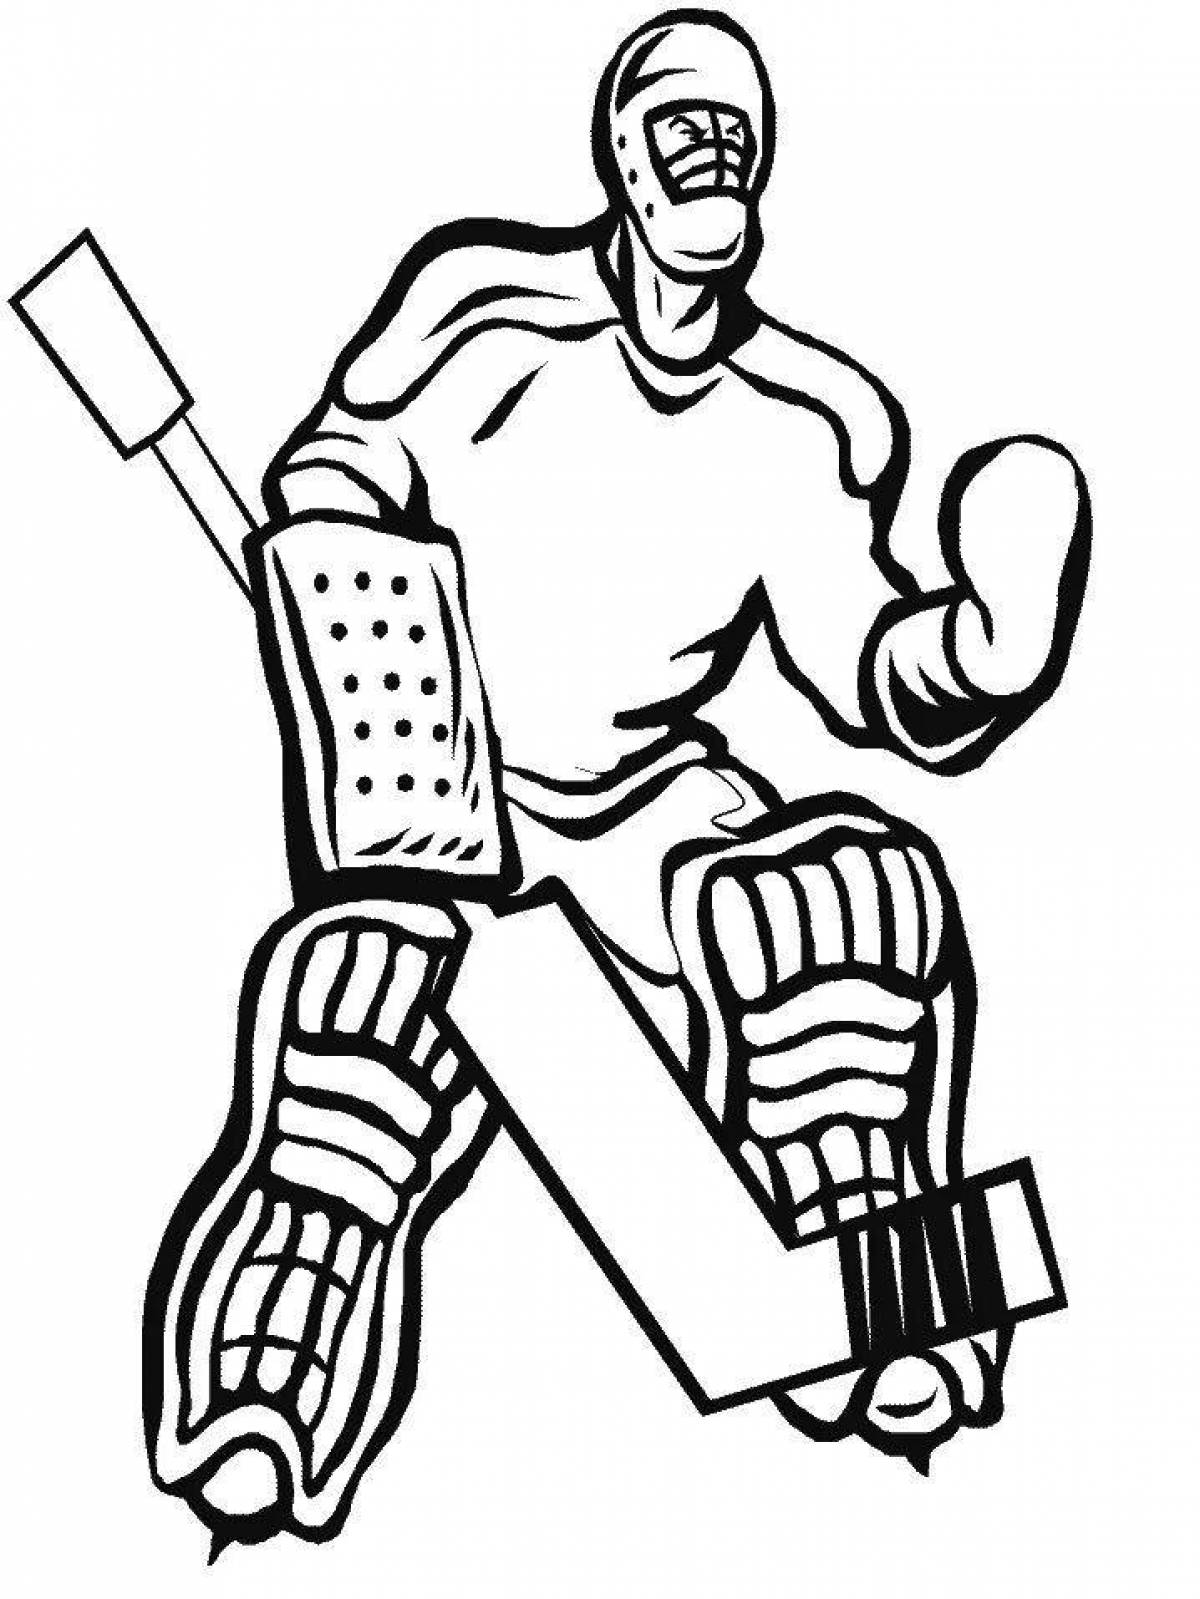 Coloring page of a fascinating hockey goalie